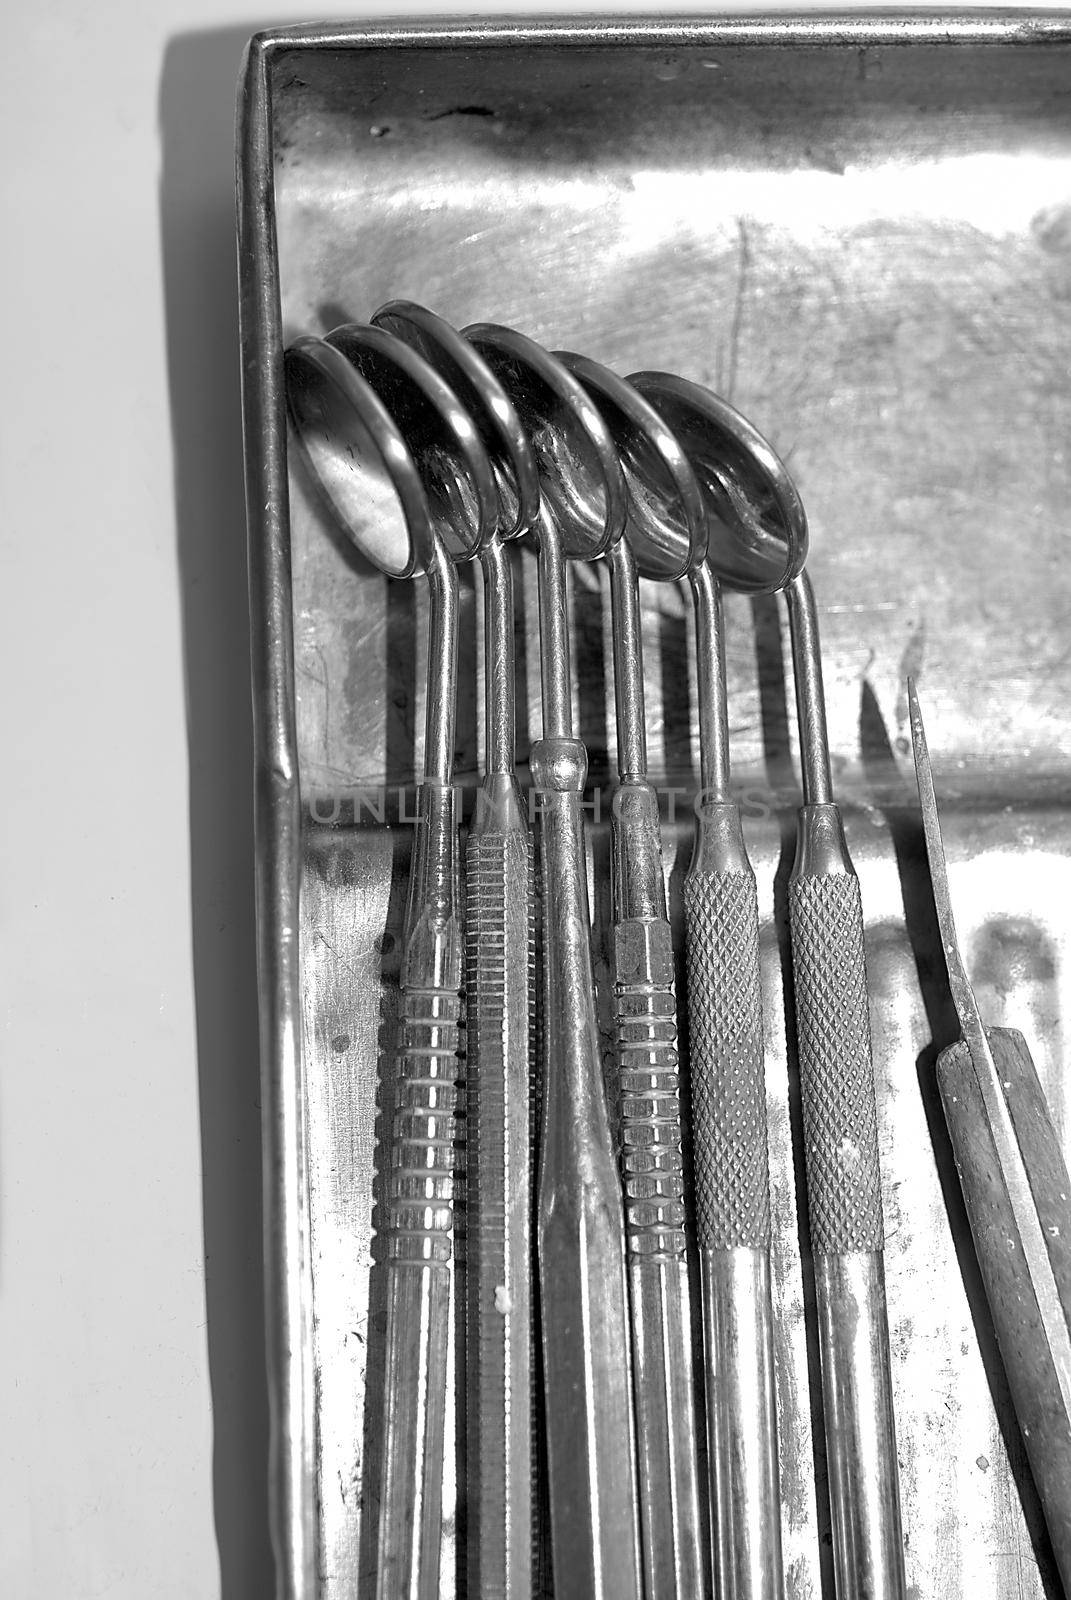 dentist equipment and tools